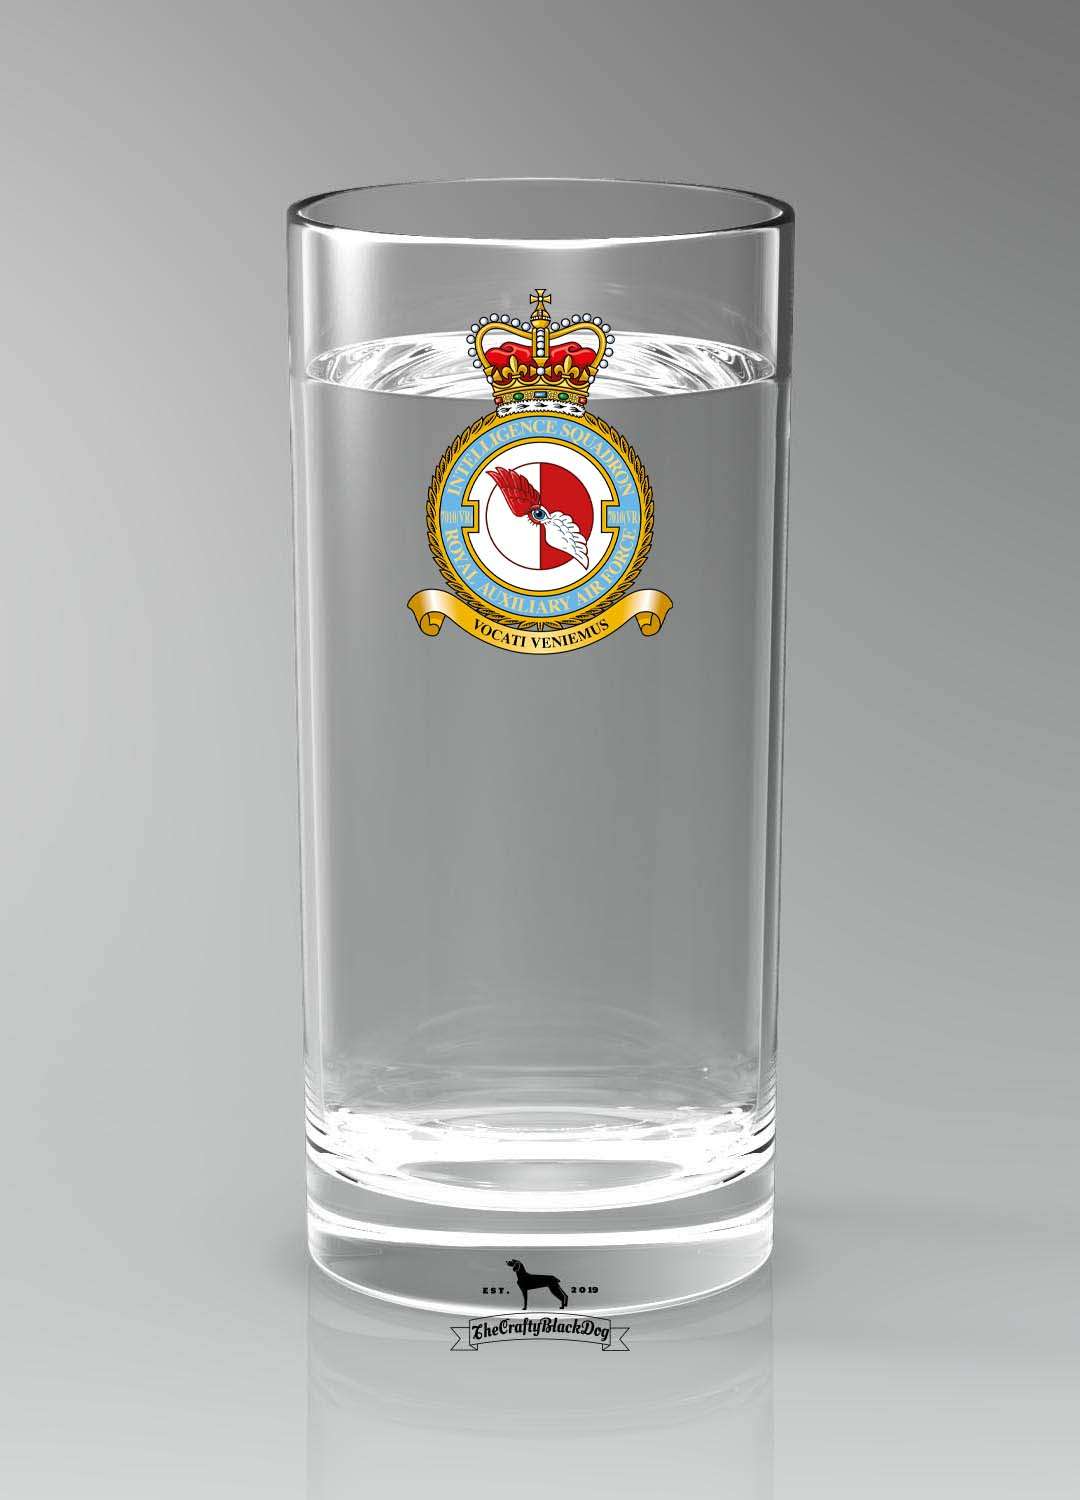 7010 VR Intelligence SQN RAuxAF - Straight Gin/Mixer/Water Glass